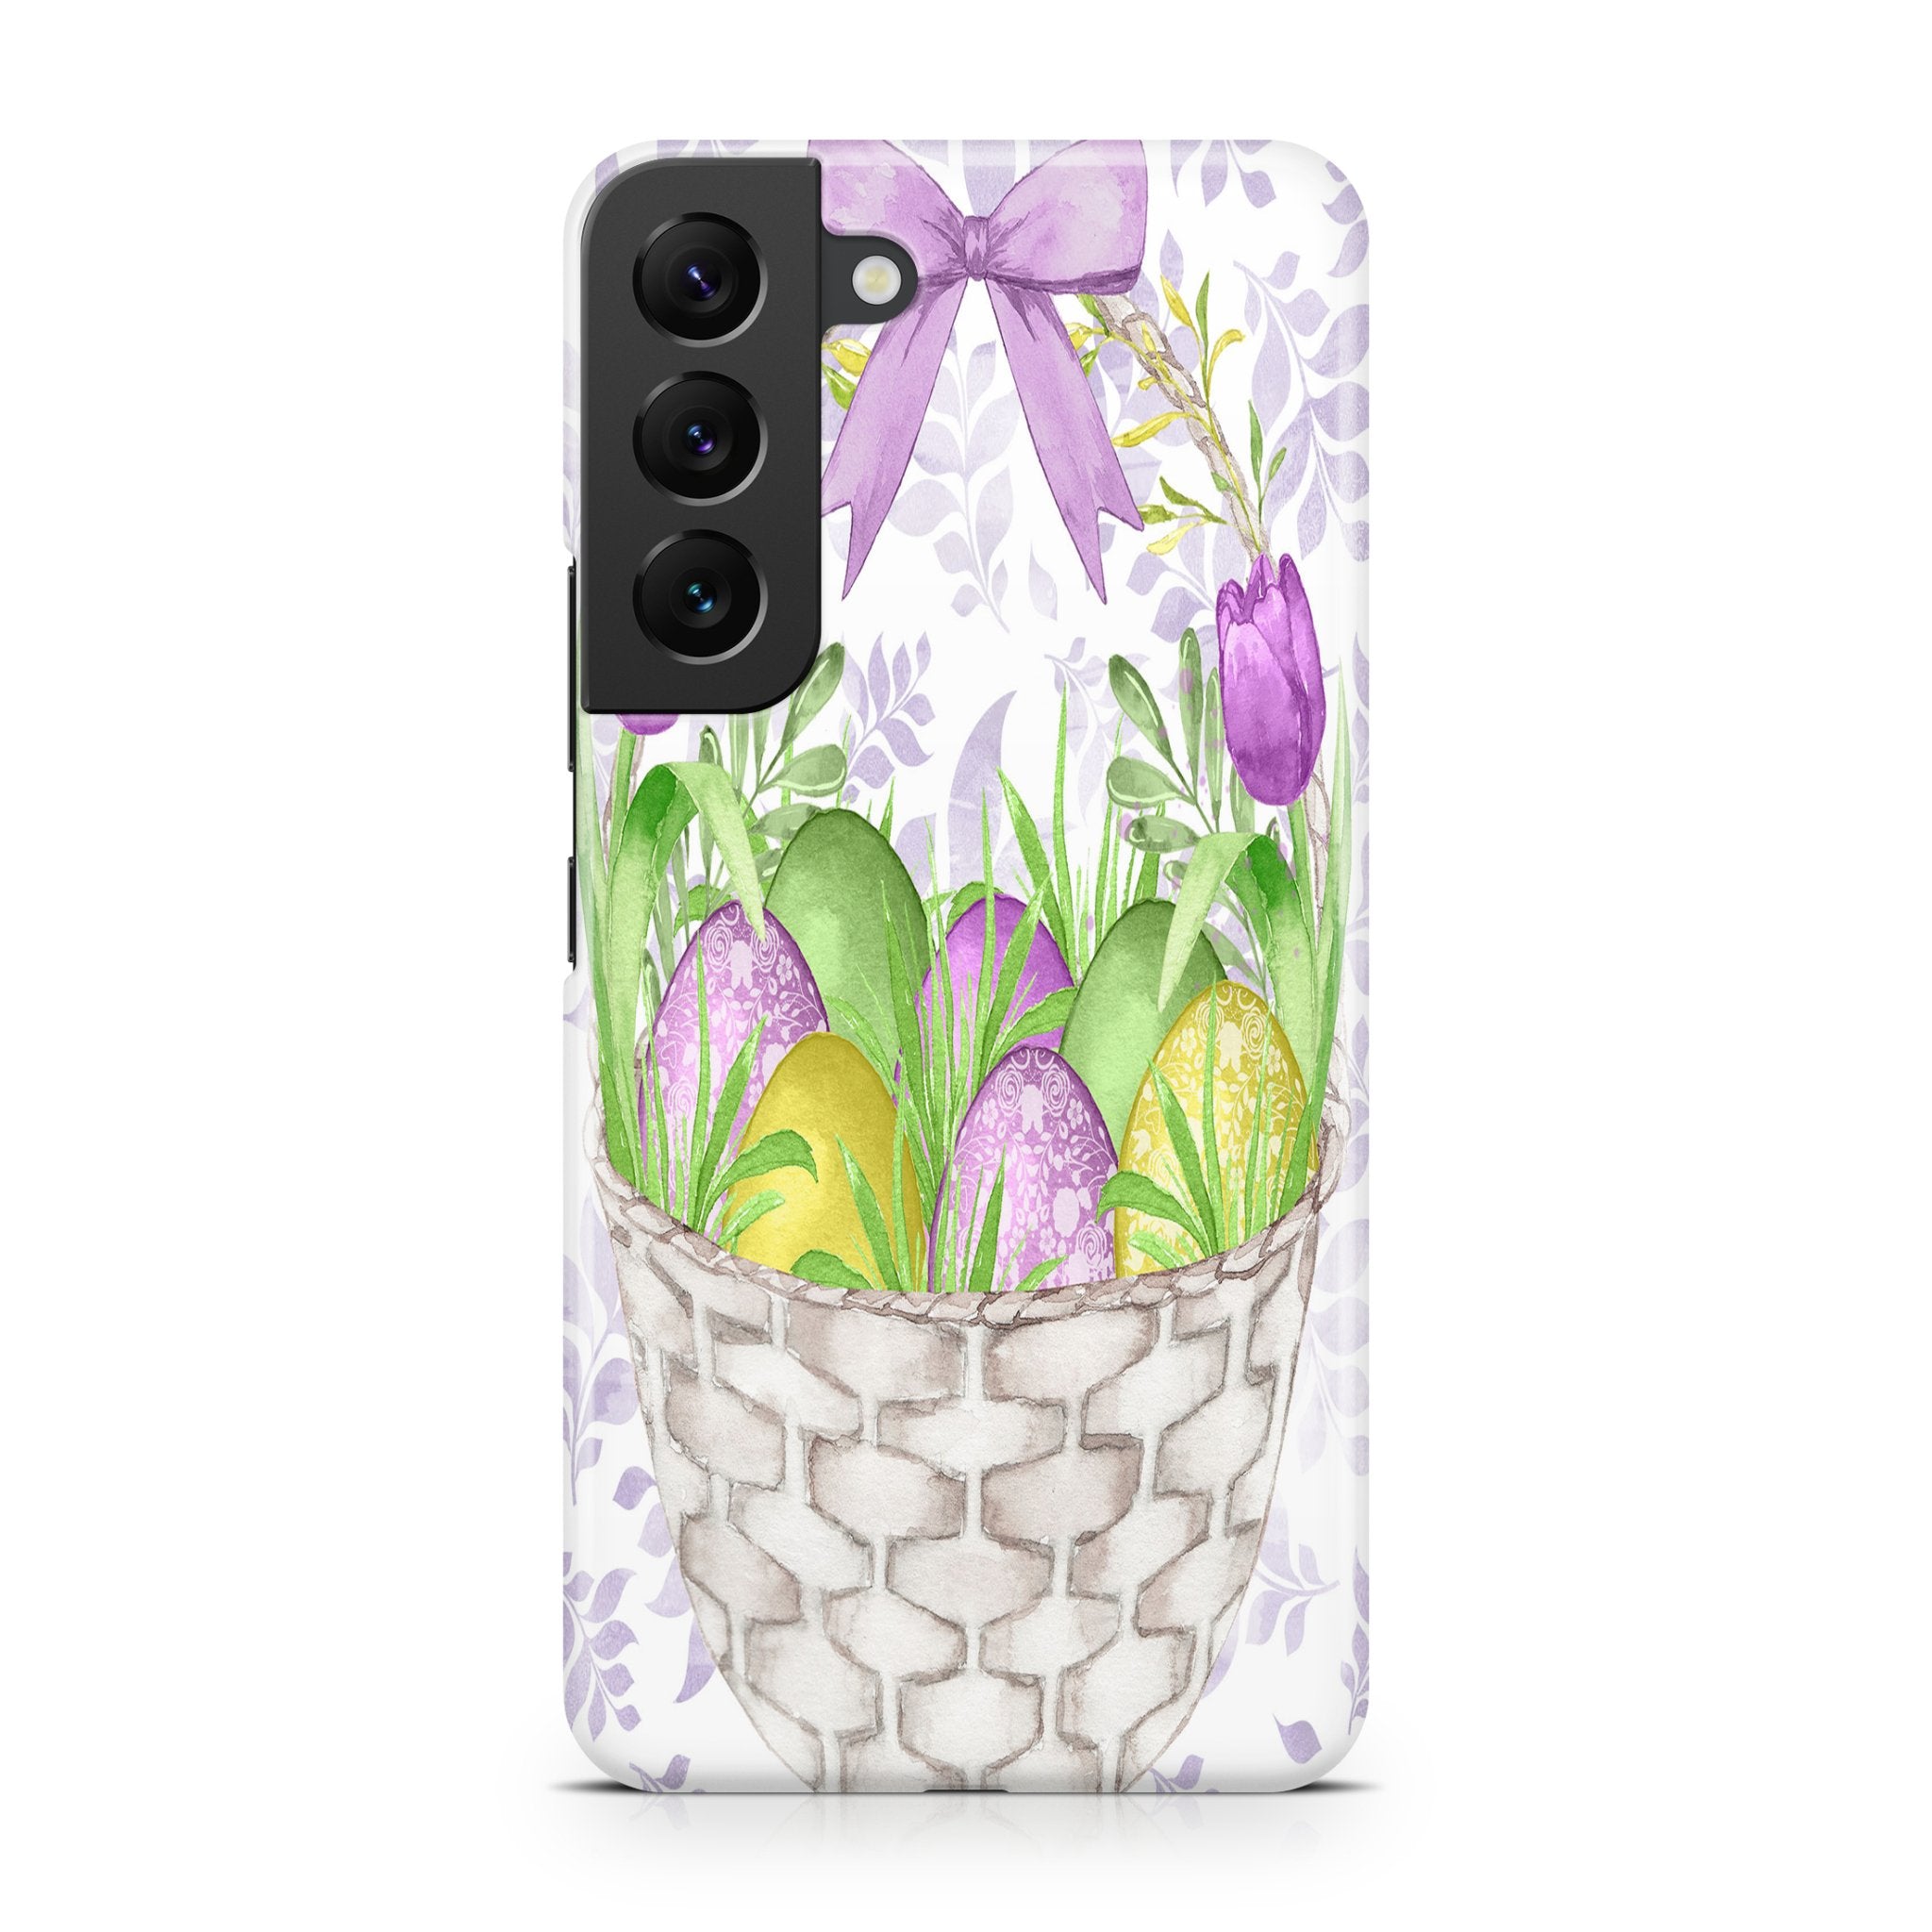 Easter Basket - Samsung phone case designs by CaseSwagger